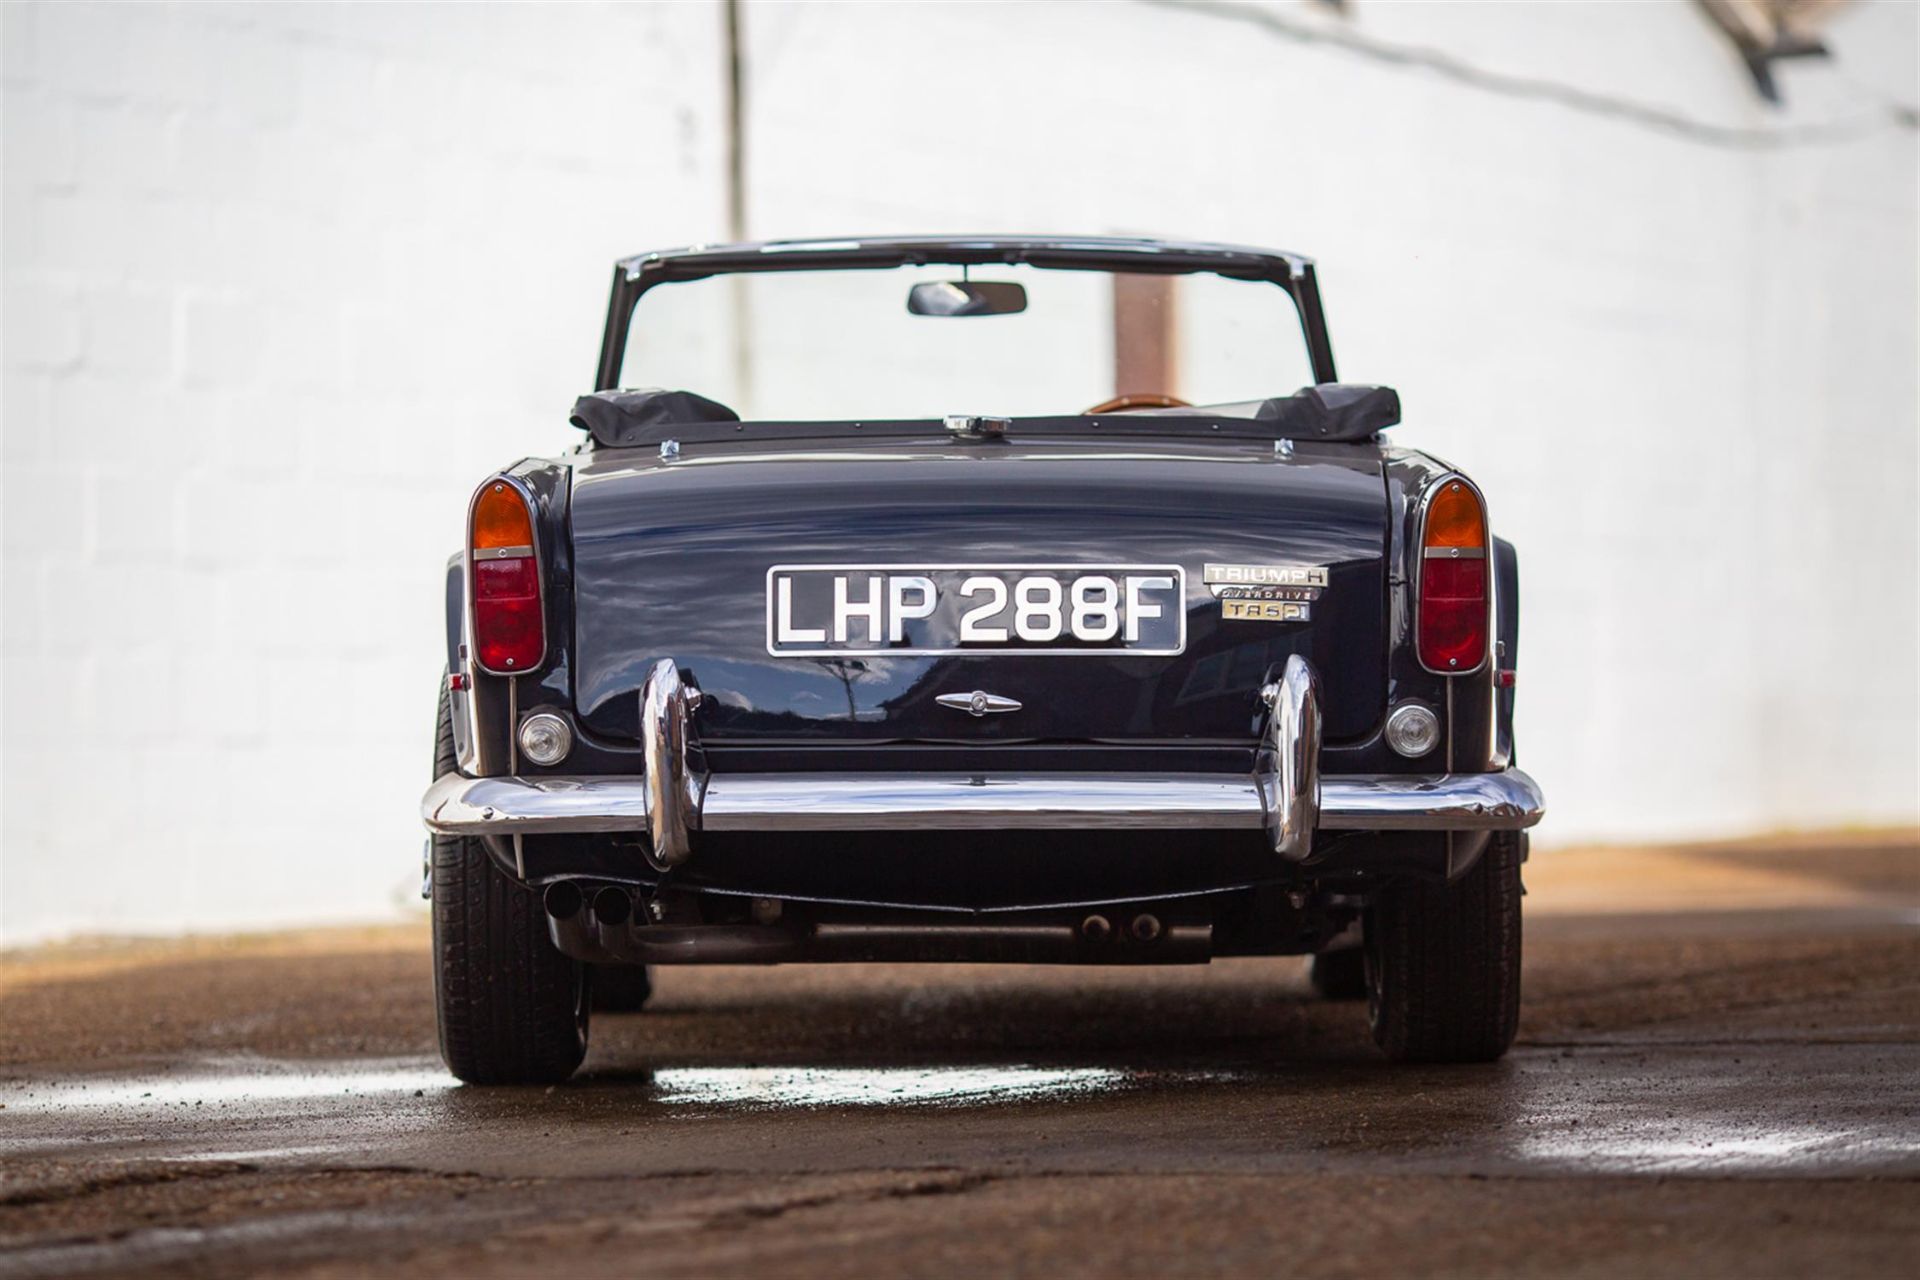 1967 Triumph TR5 - The First Ever TR5 - Image 7 of 10